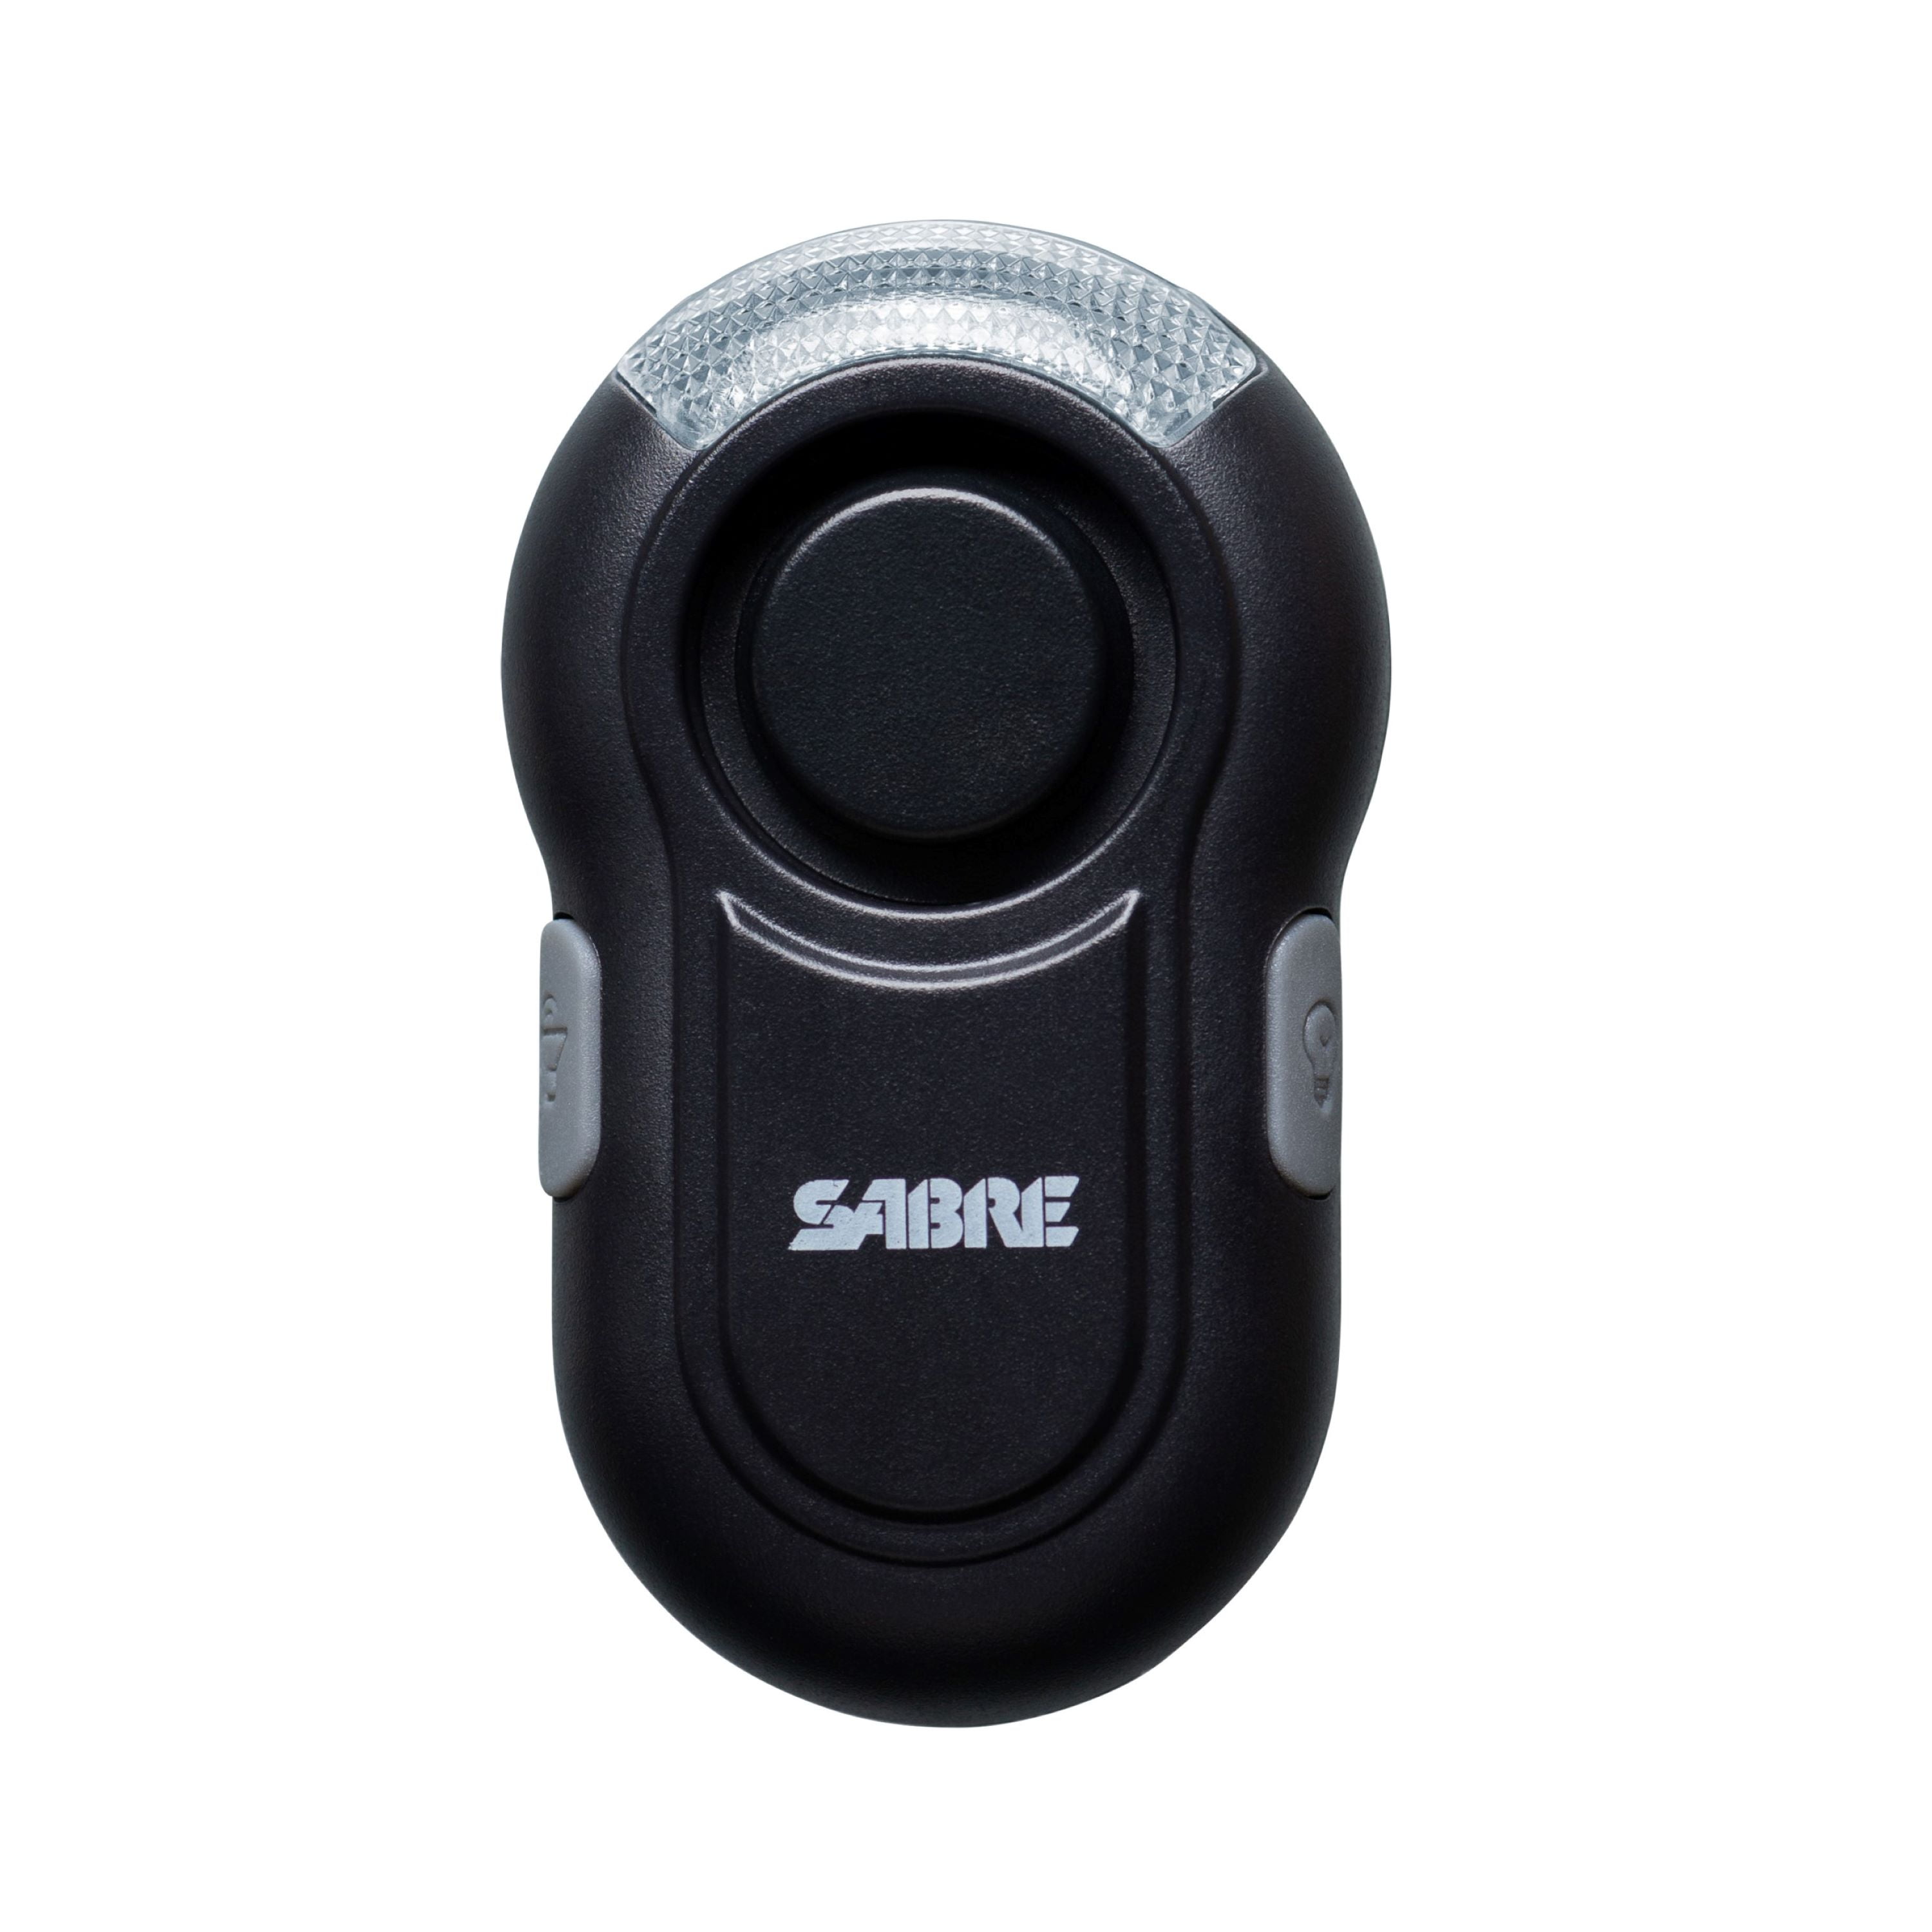 SABRE 2-in-1 Clip-on Personal Alarm & LED Safety Light